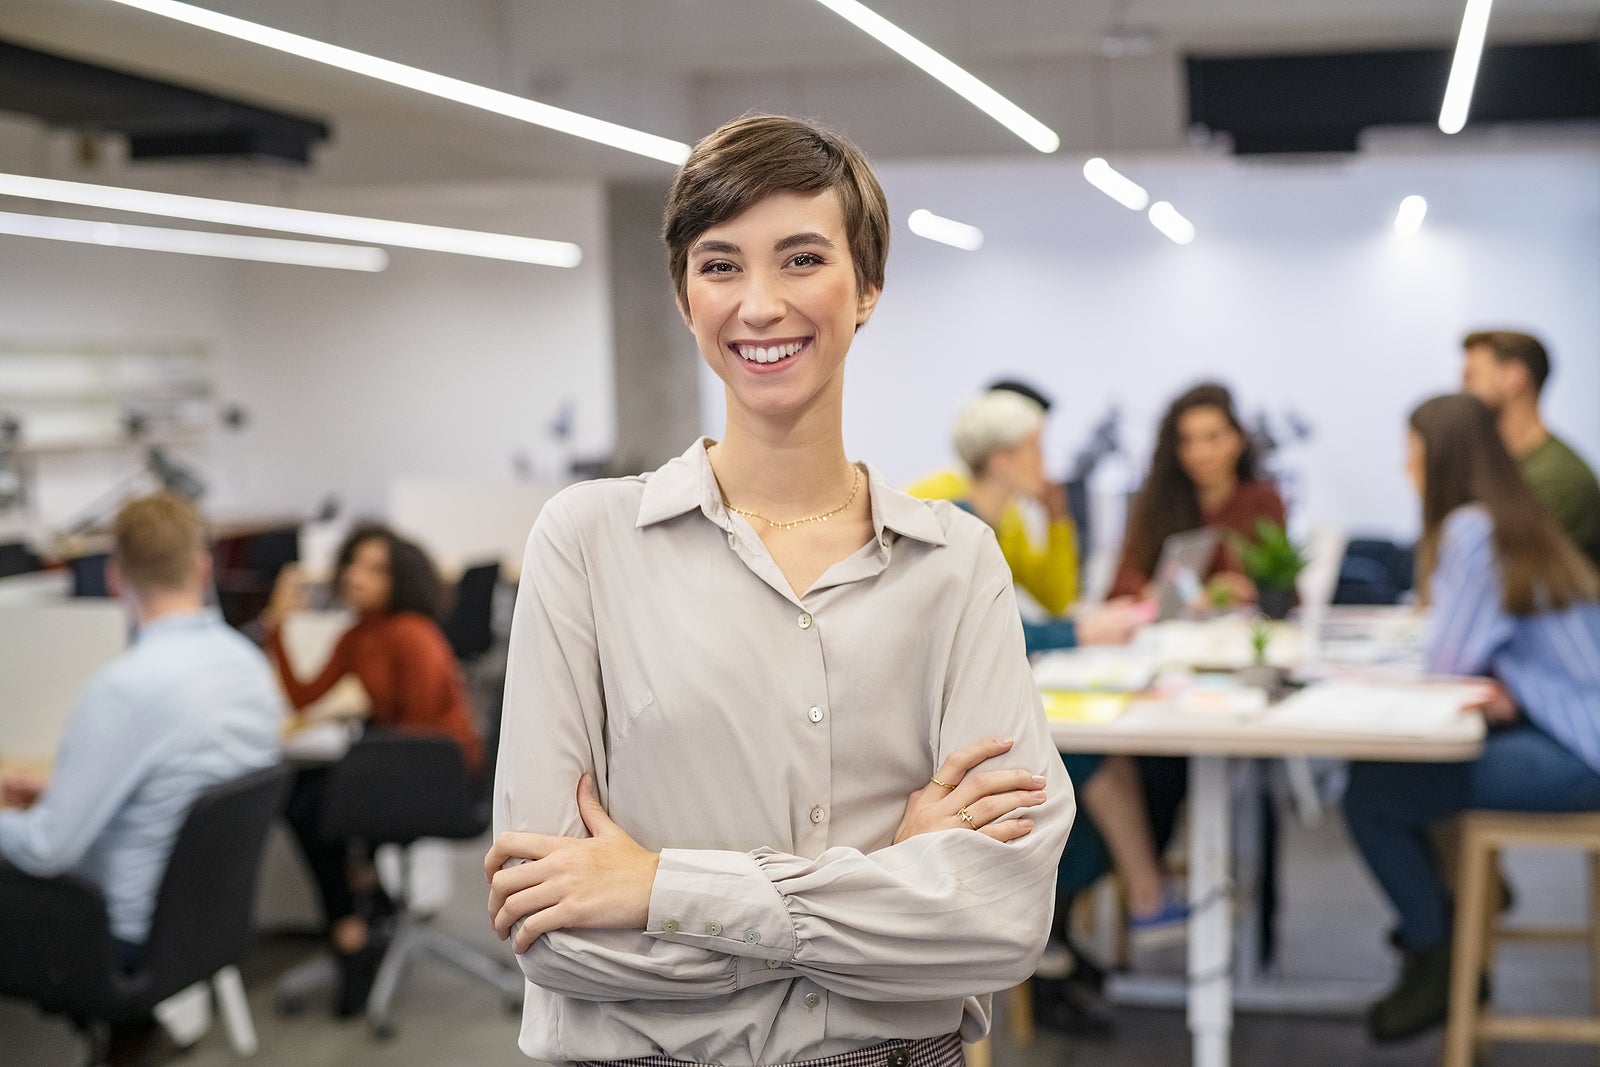 Successful young woman standing in front of businesspeople and smiling. Portrait of confident and proud businesswoman with team working in background at modern office. Business woman looking at camera